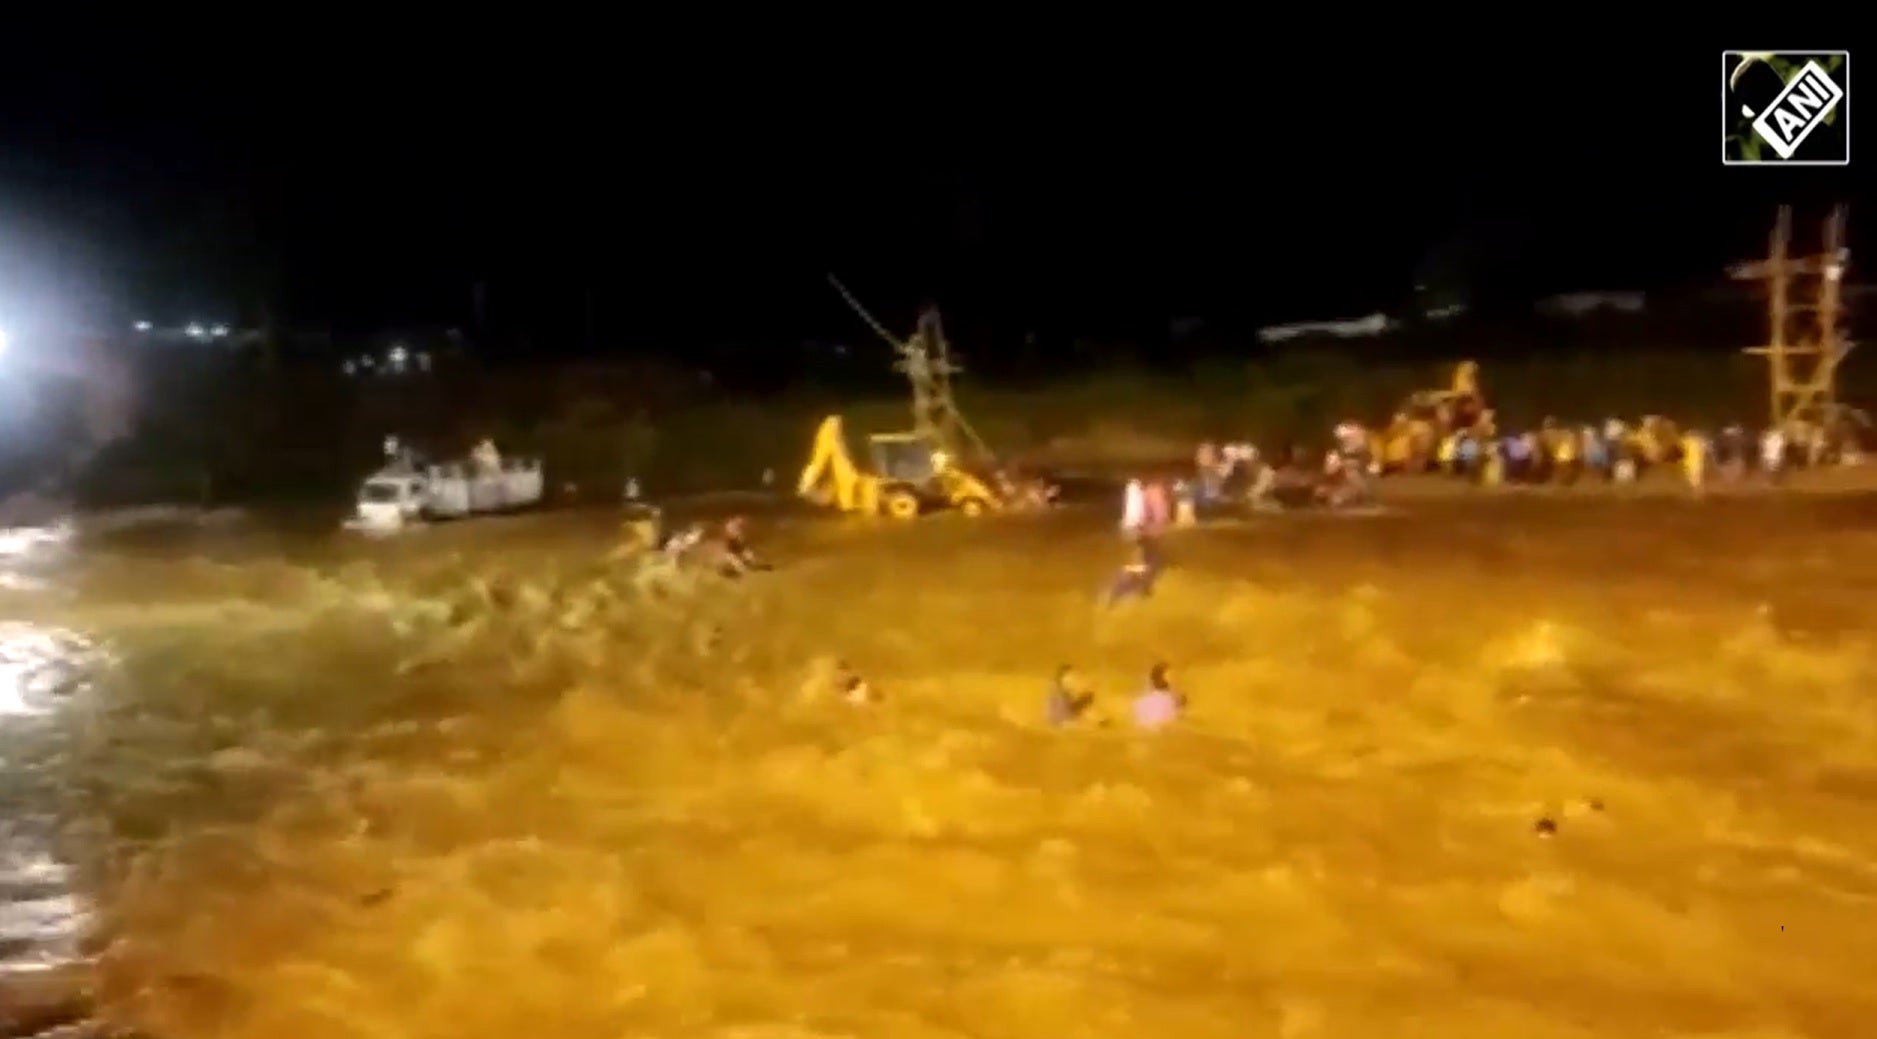 Screengrab from a video showing people being swept away during a flash flood in West Bengal on Wednesday, 5 October 2022